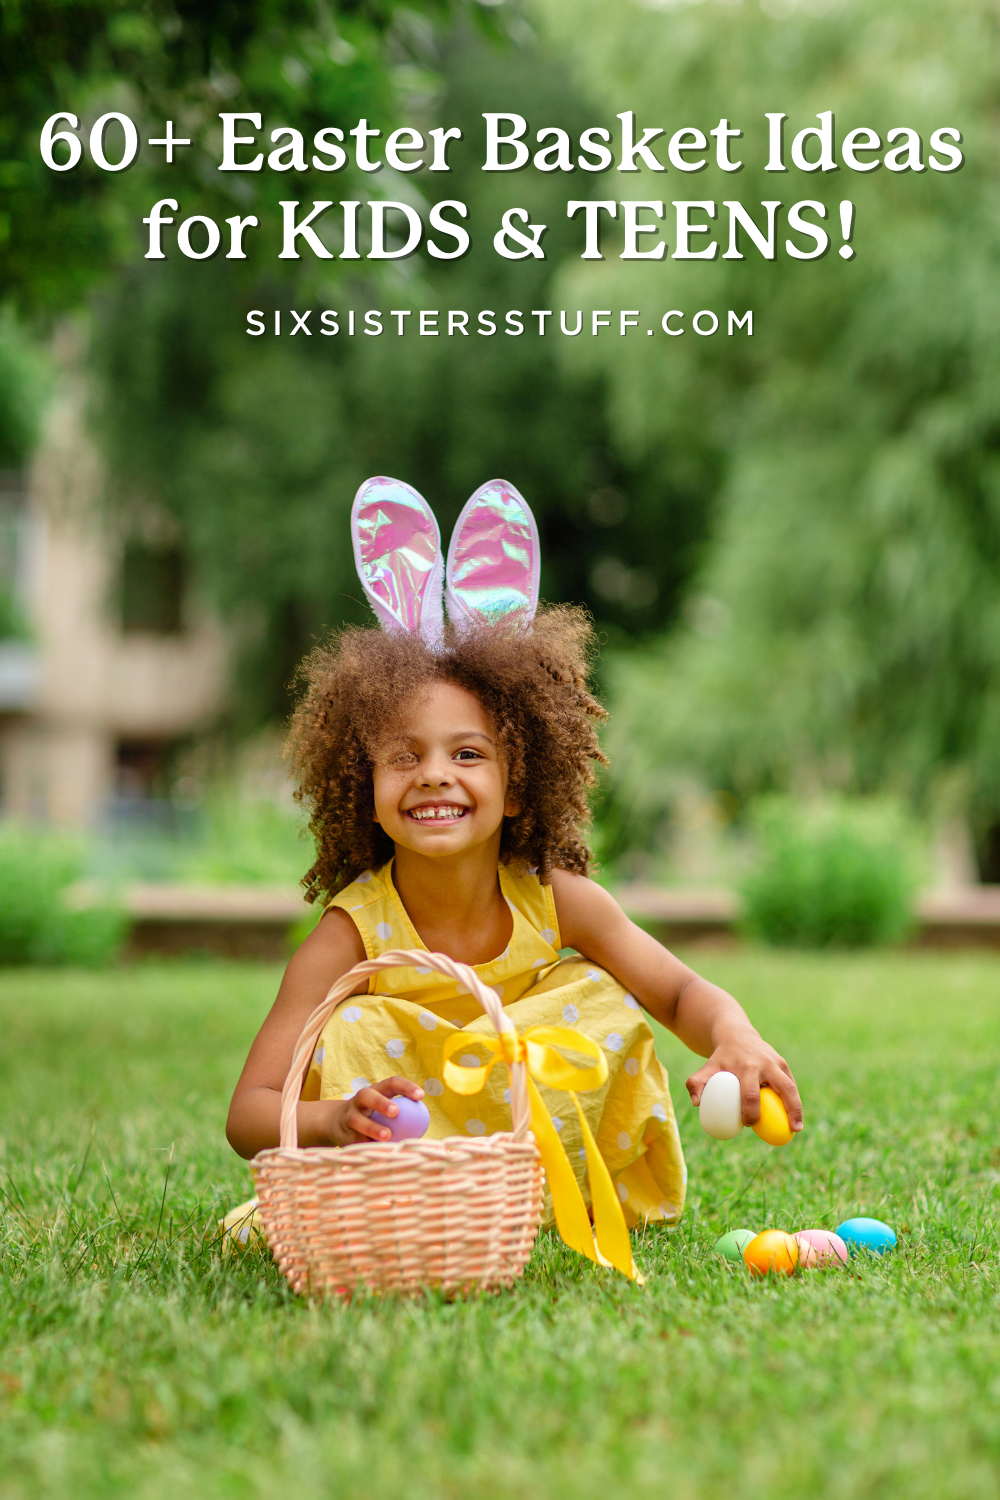 60+ Easter Basket Ideas for Babies, Kids, and Teens